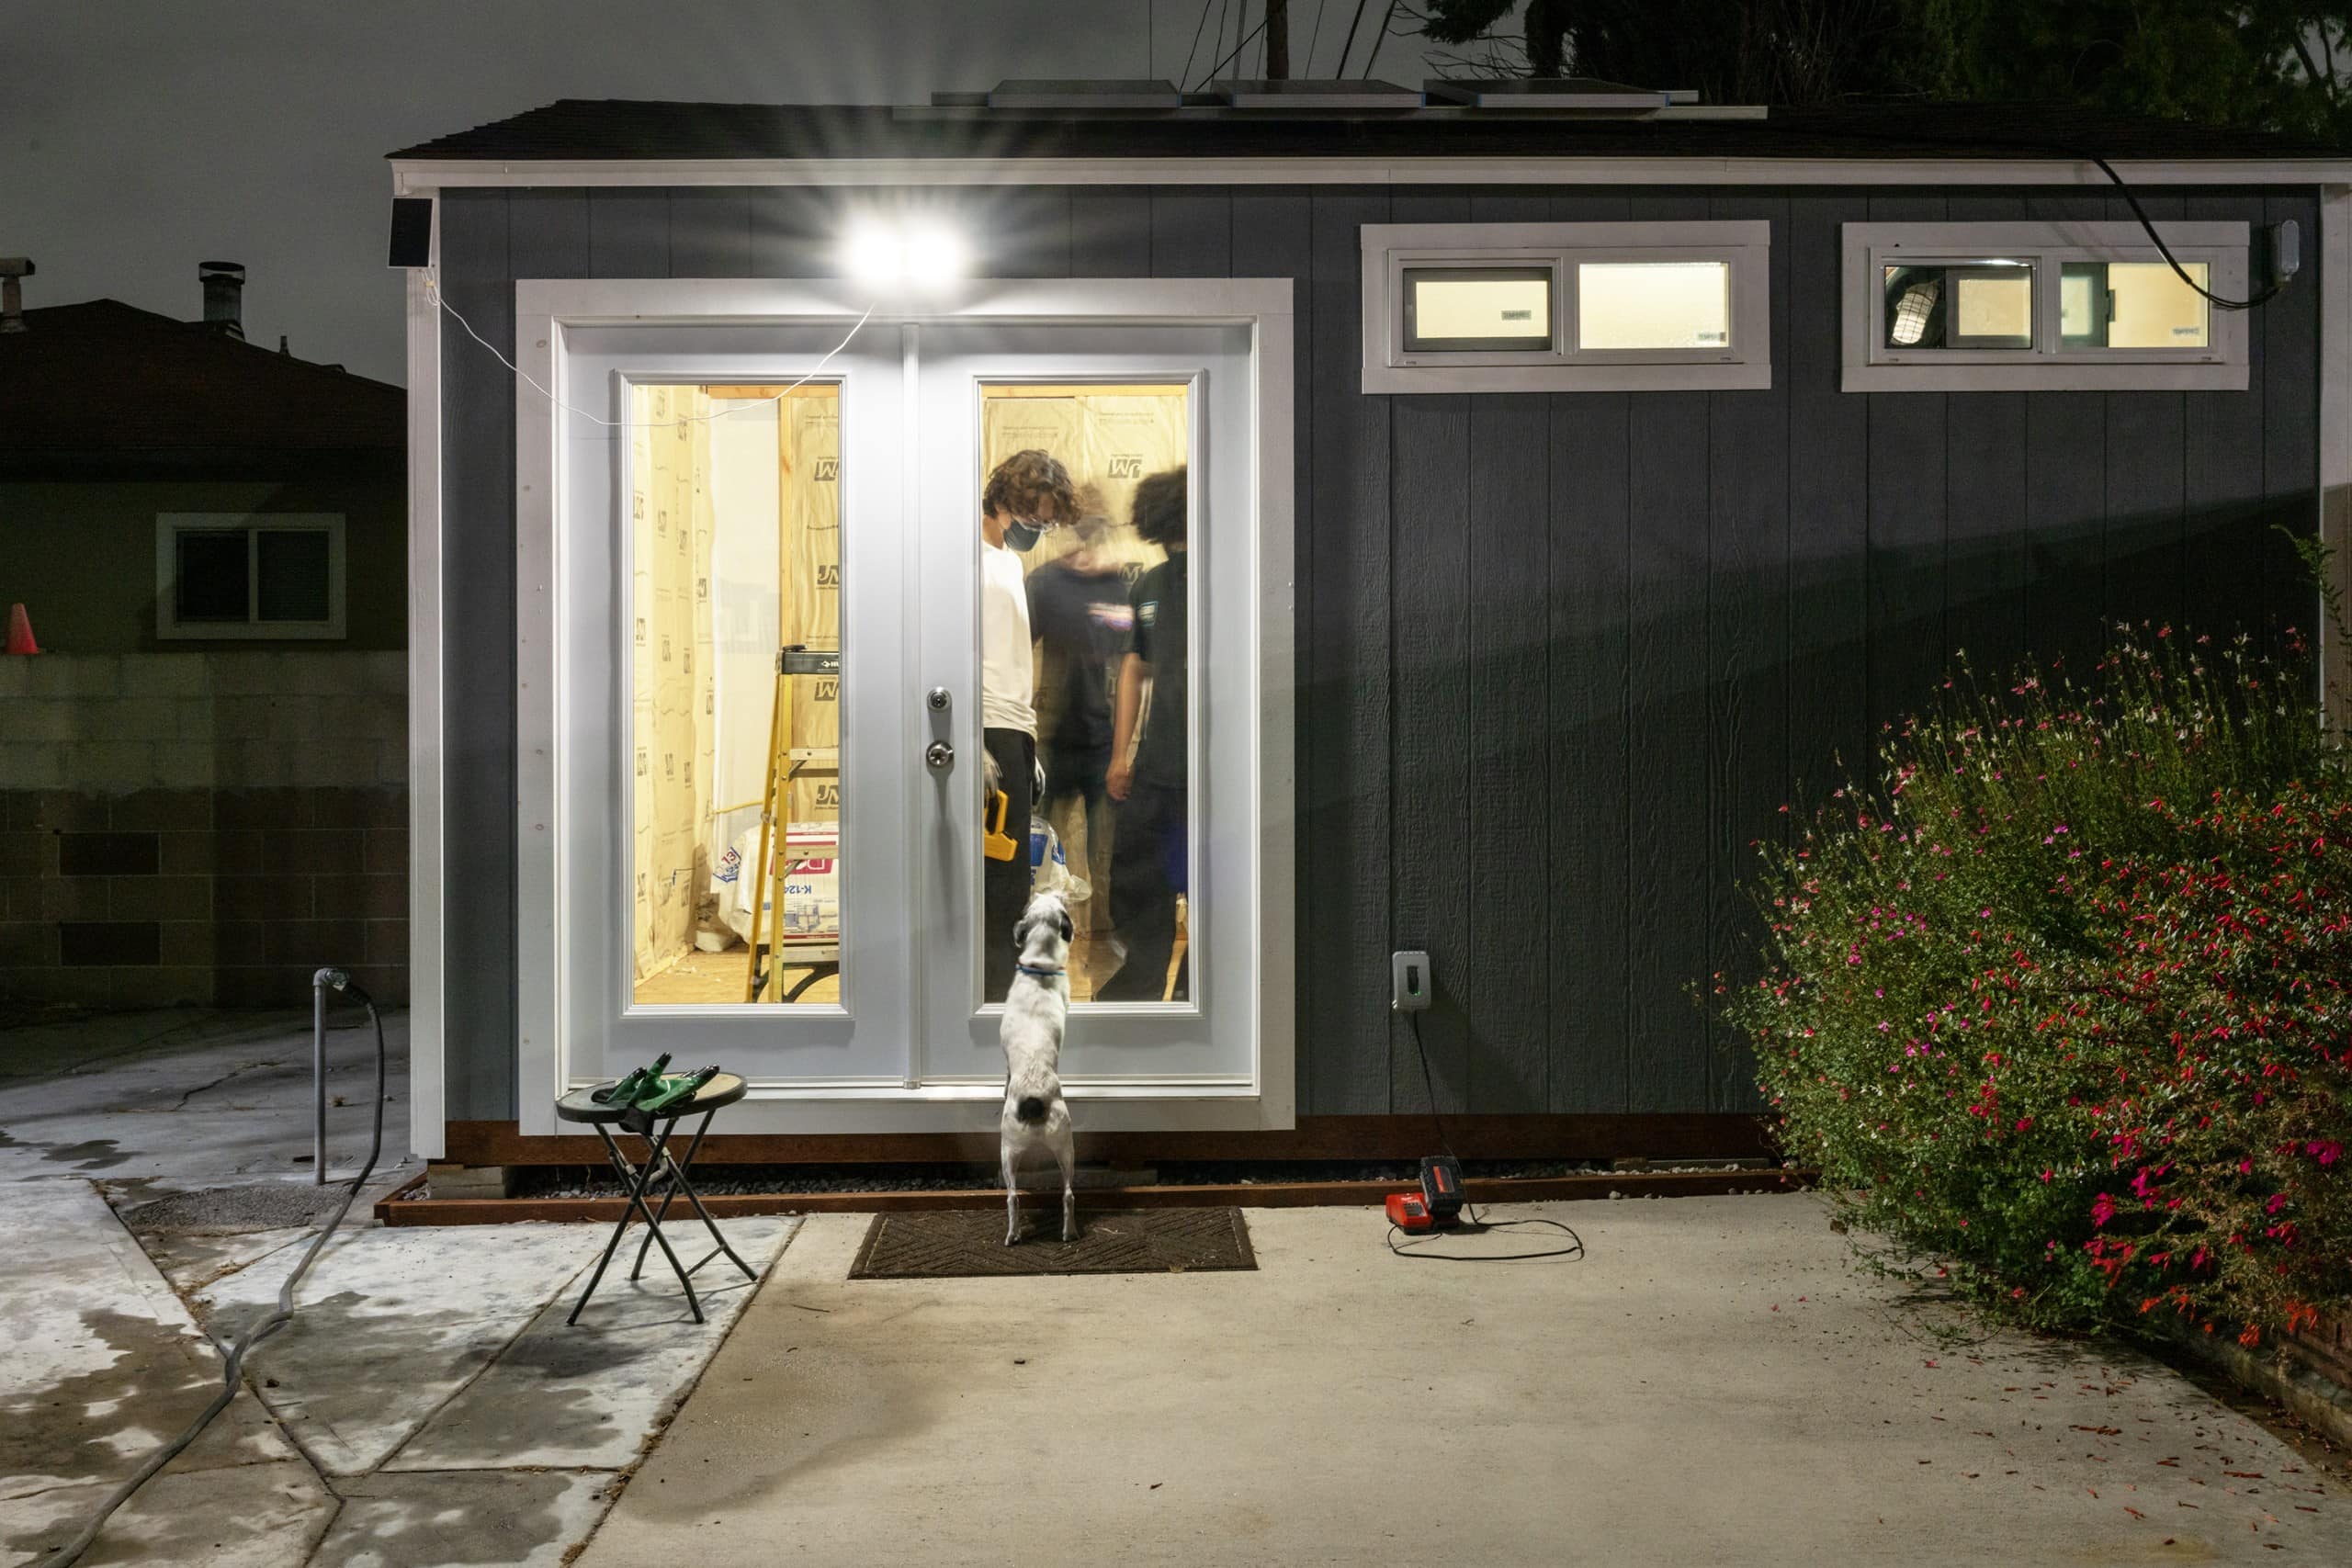 Suburban Nightscapes #6 (Shed Project)